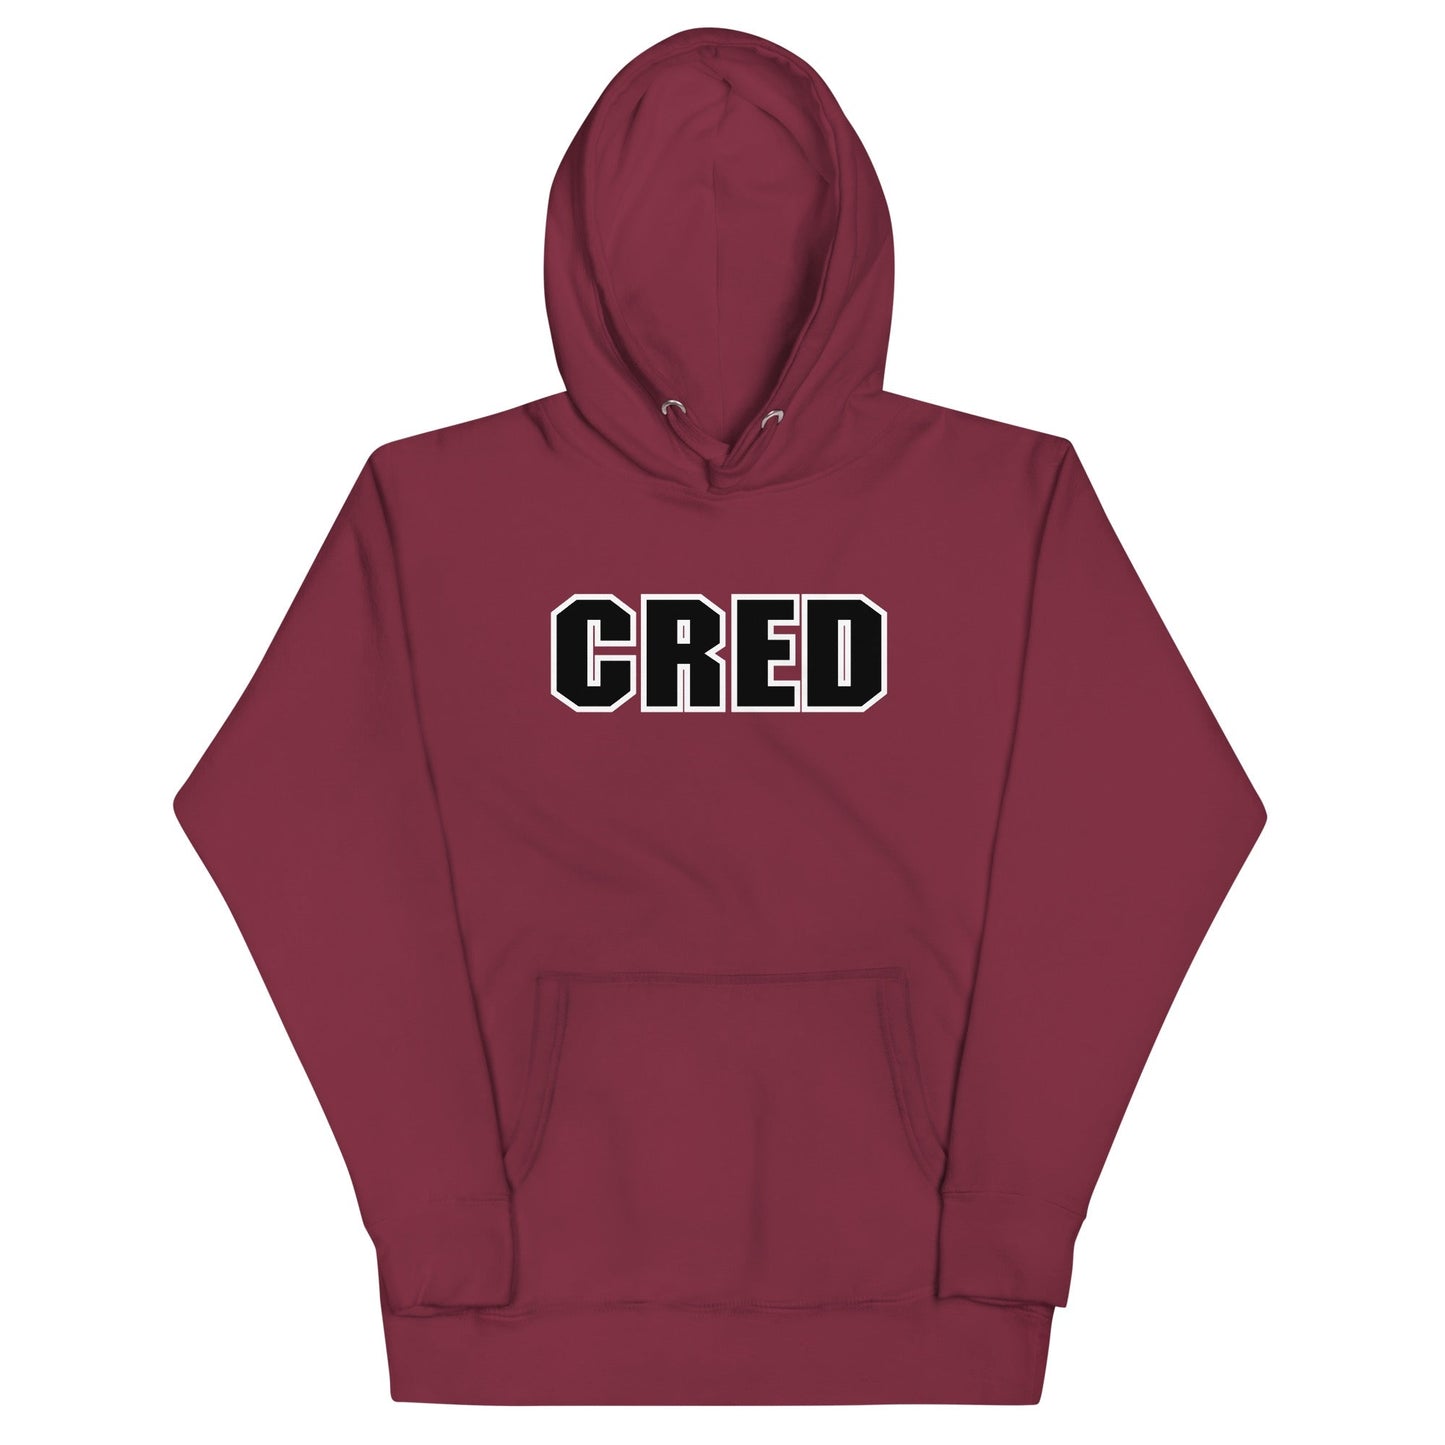 South Park CRED Adult Hoodie - Paramount Shop